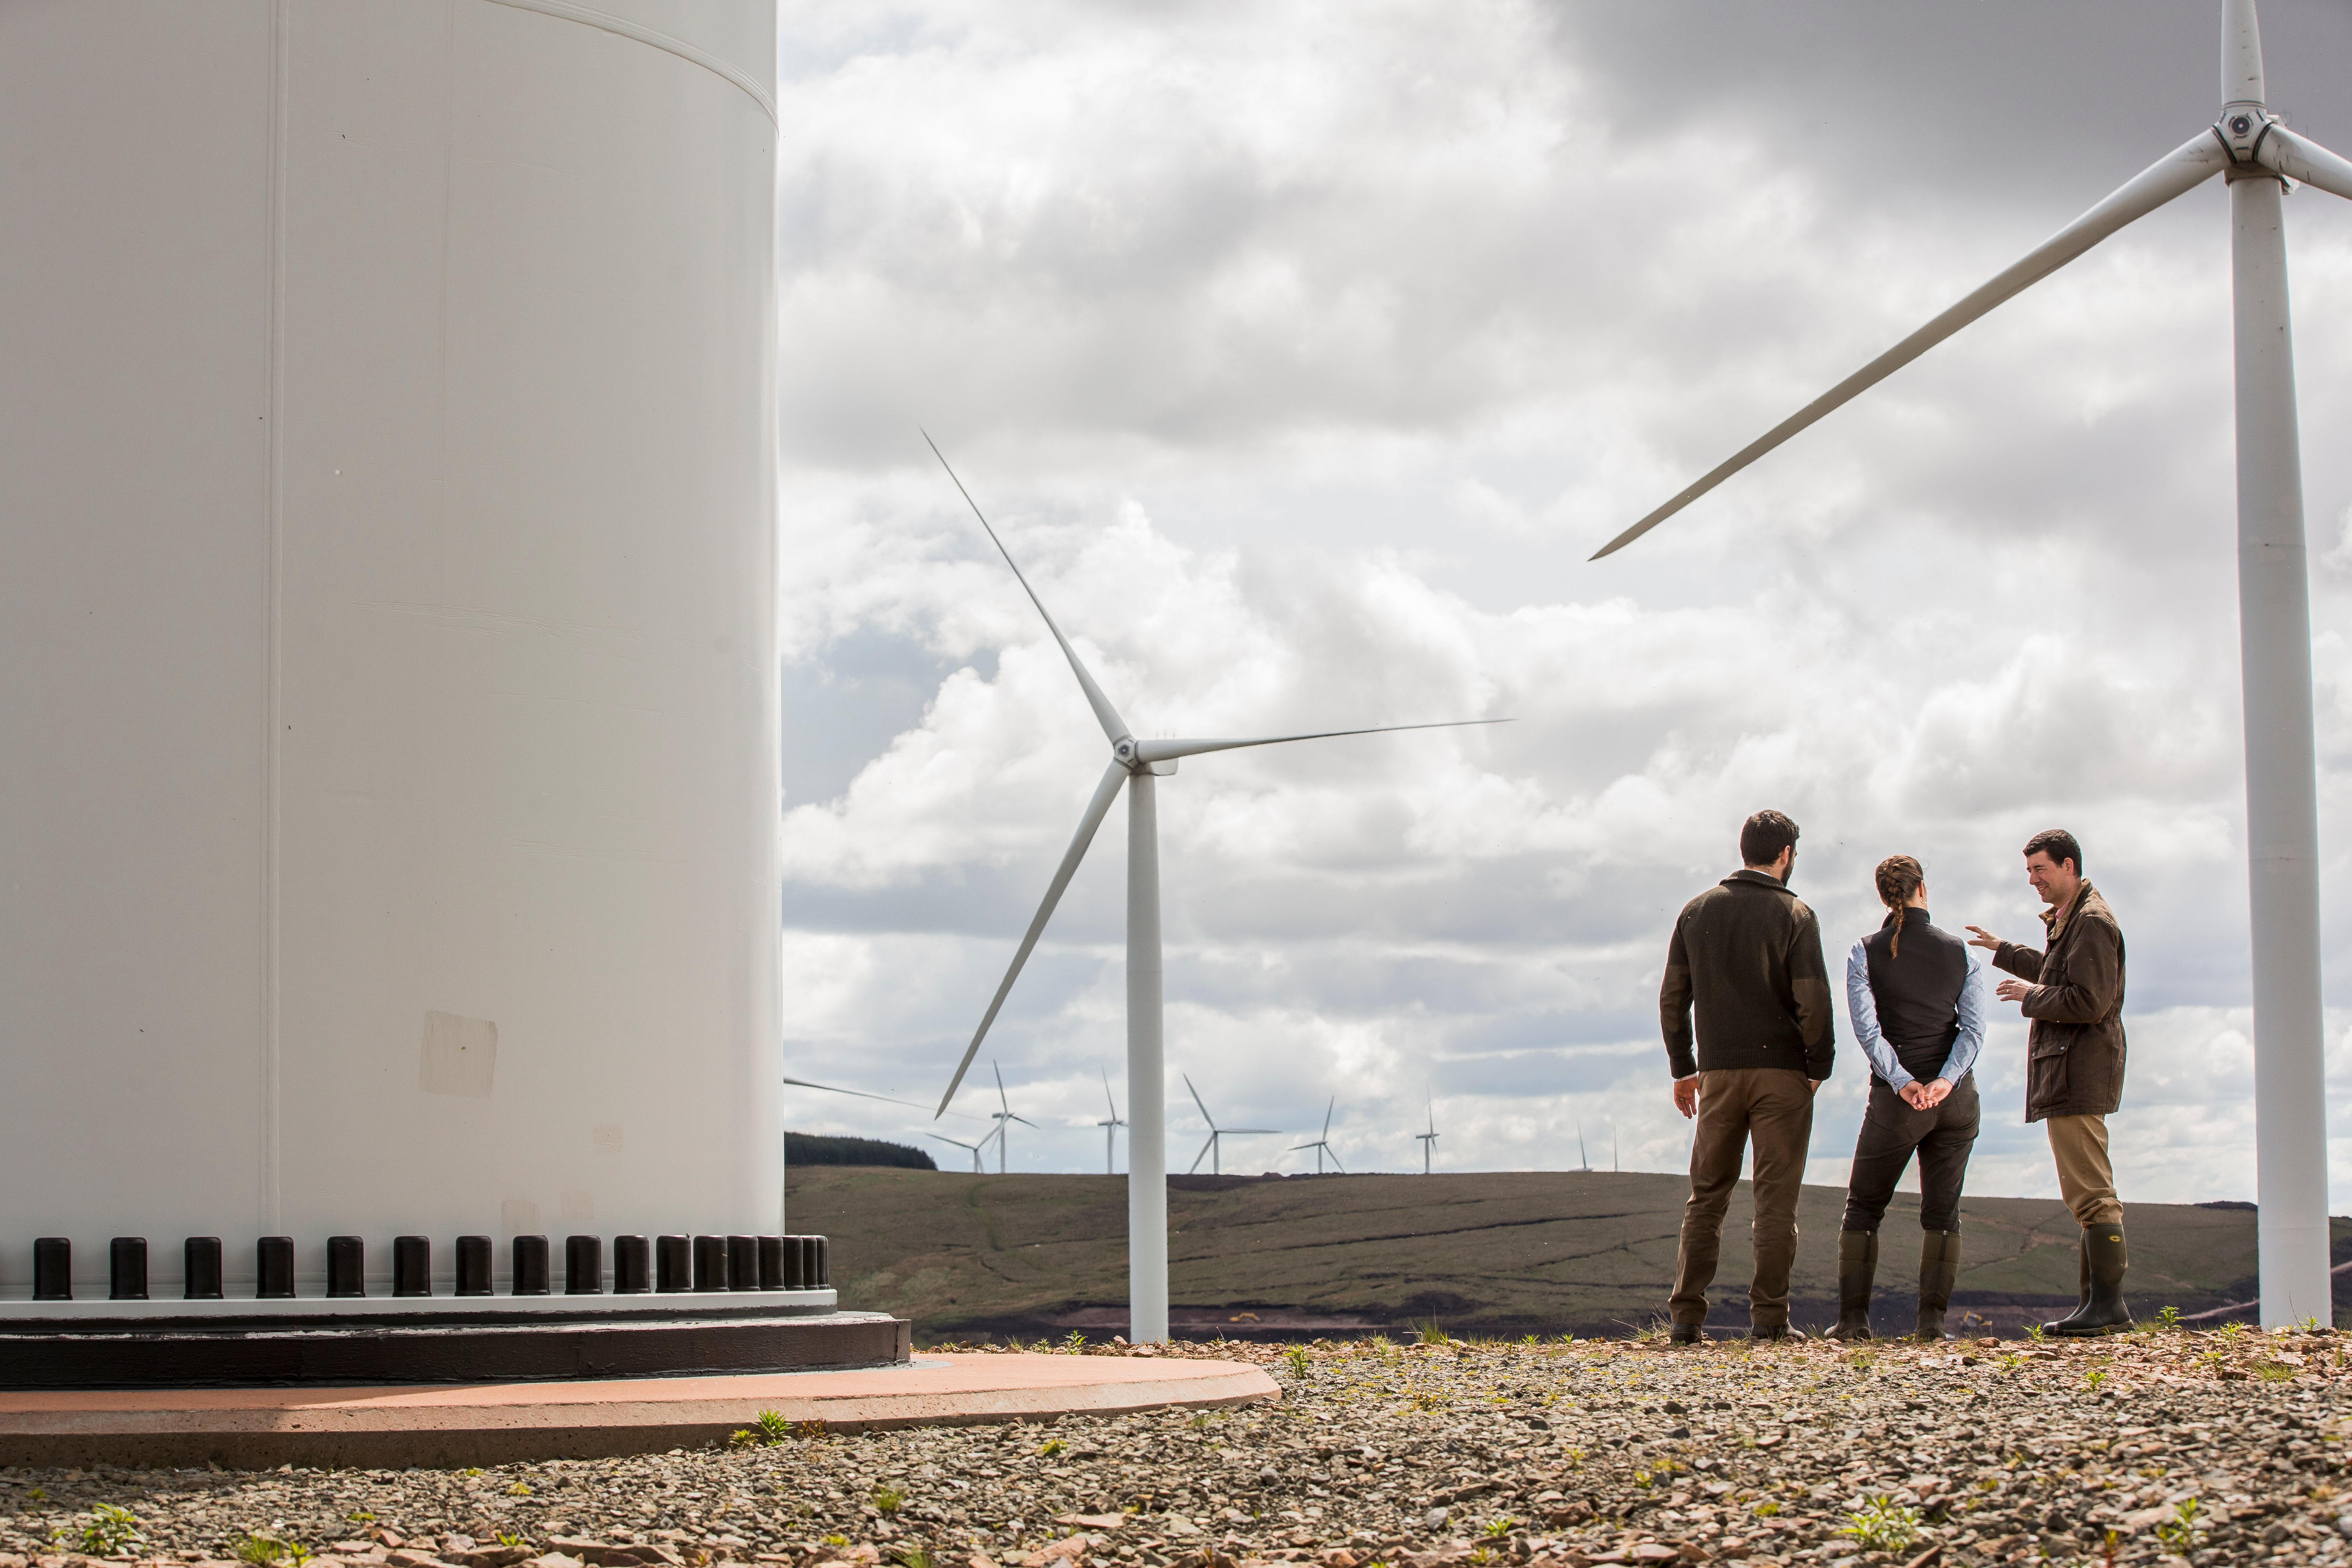 We have unparalleled knowledge across all areas of the renewable energy industry